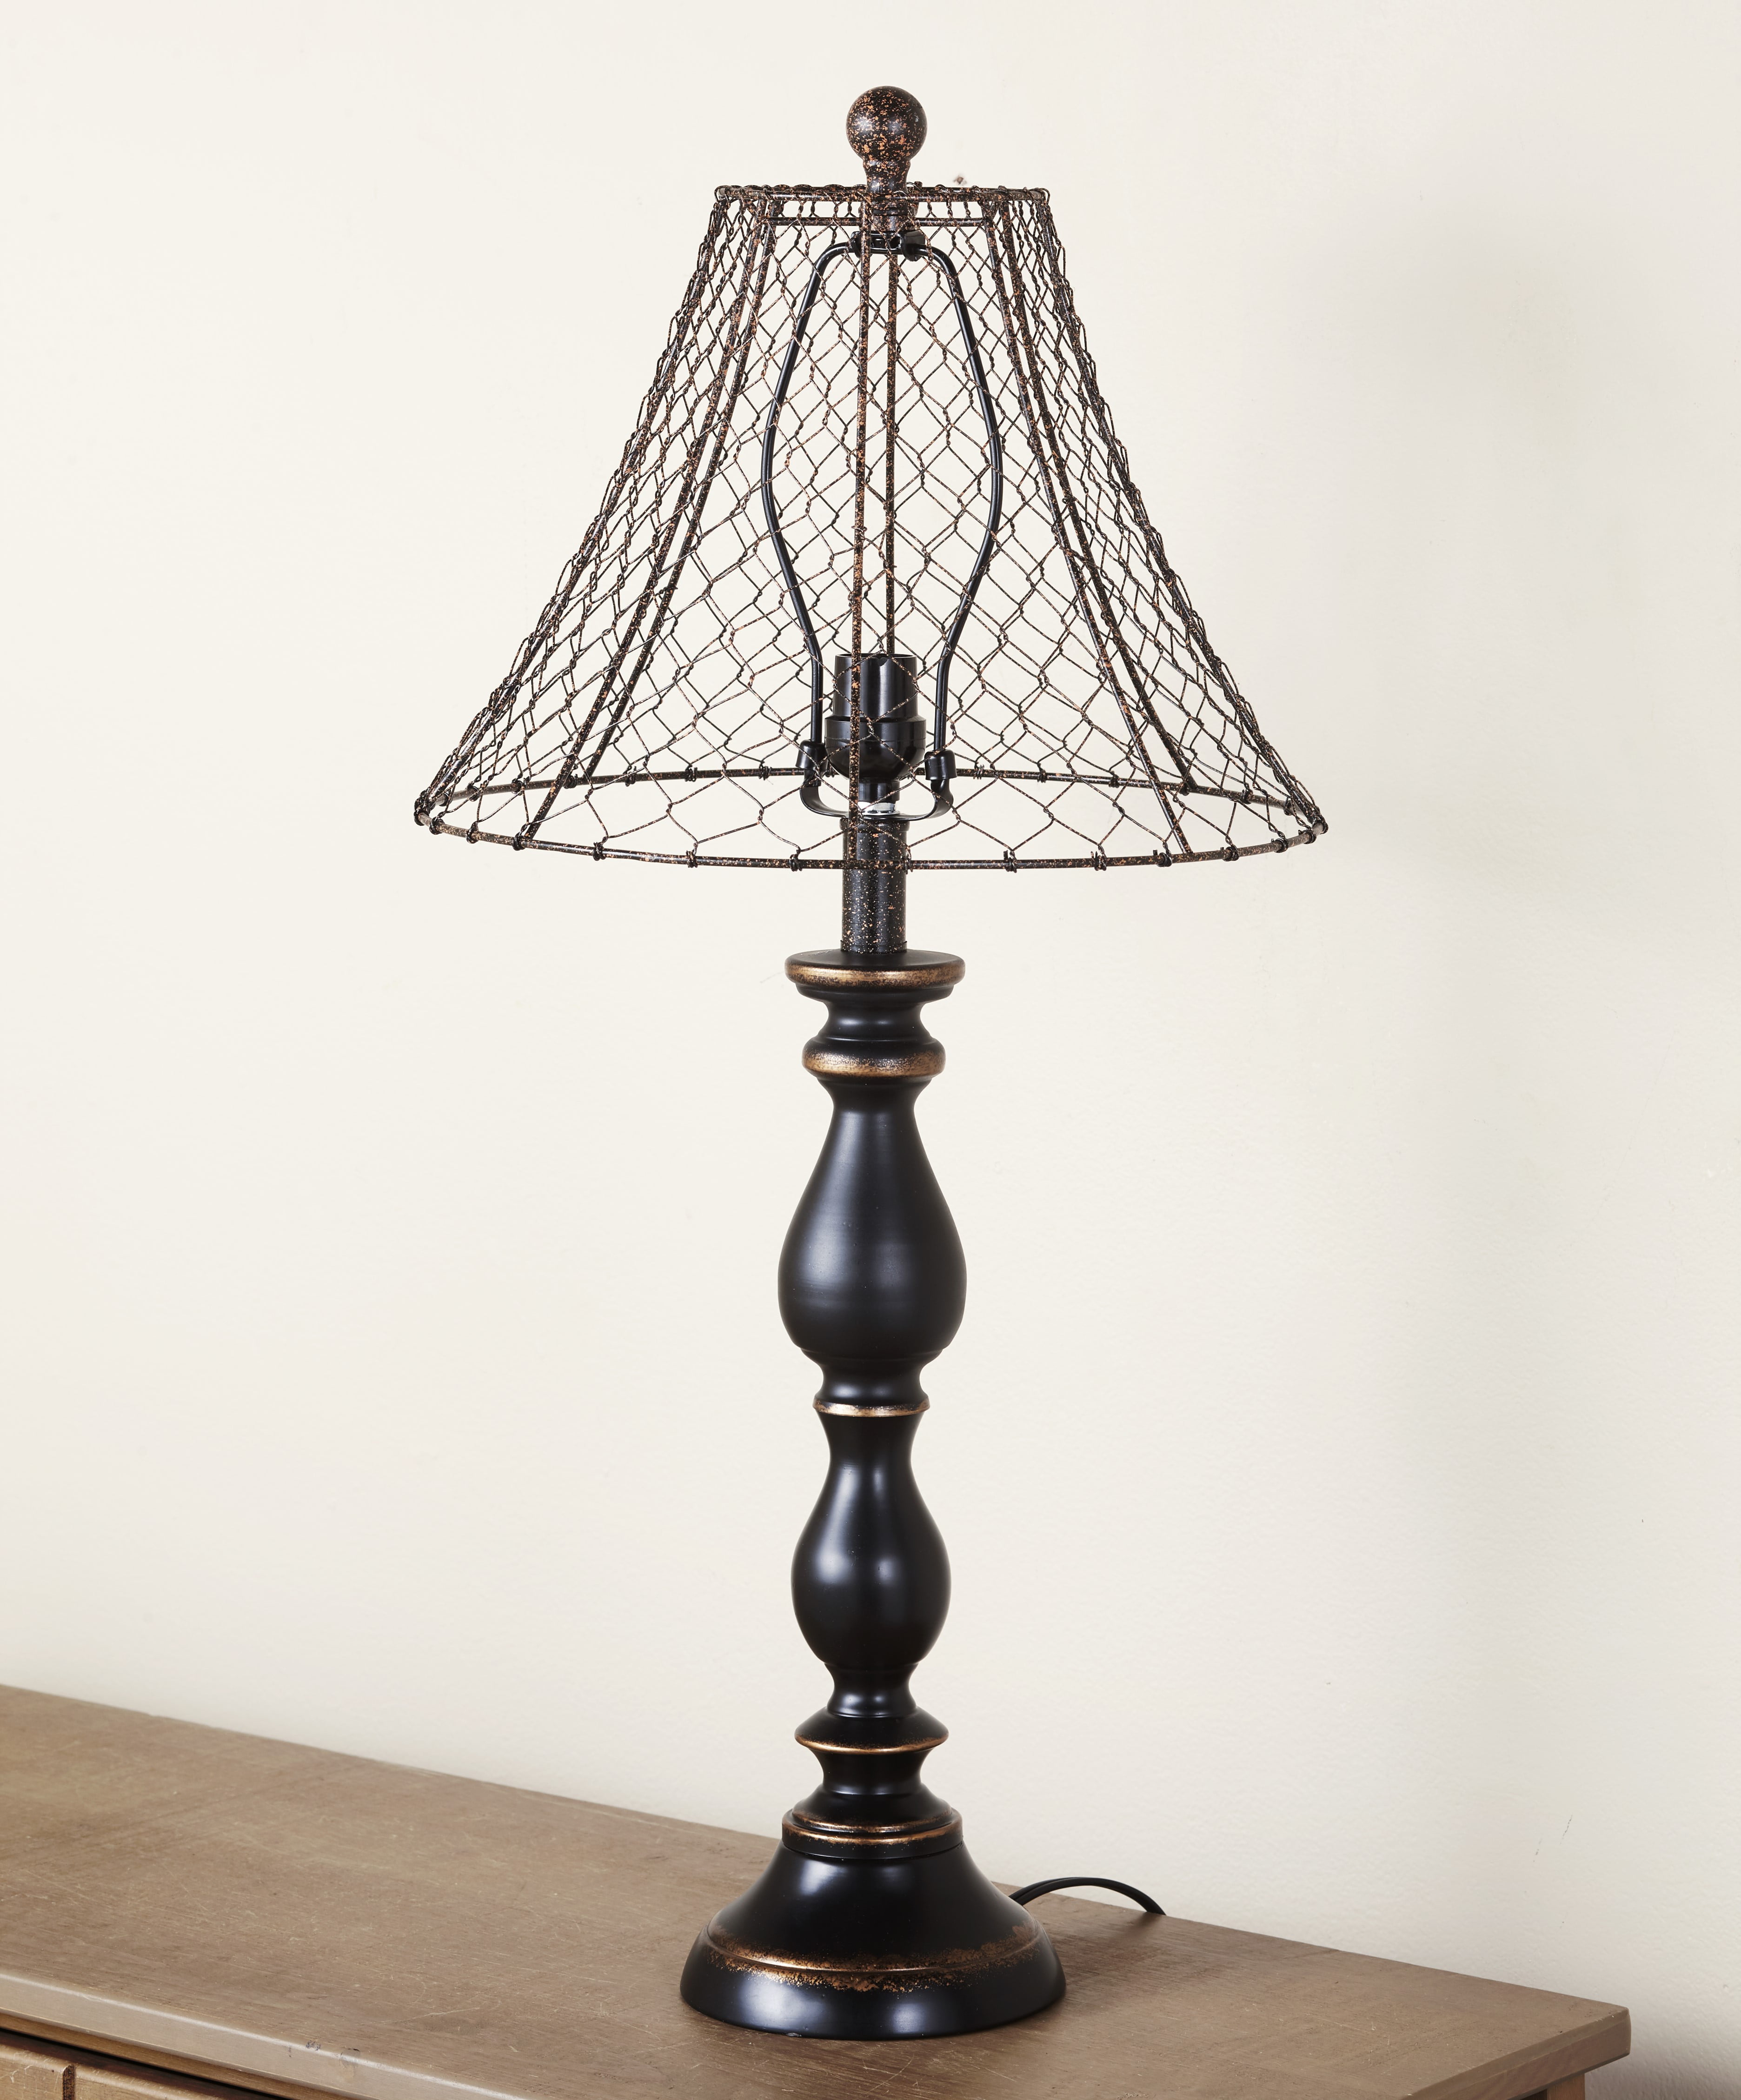 Rustic Chicken Wire Shade Touch Lamp with Distressed Finish - Walmart.com